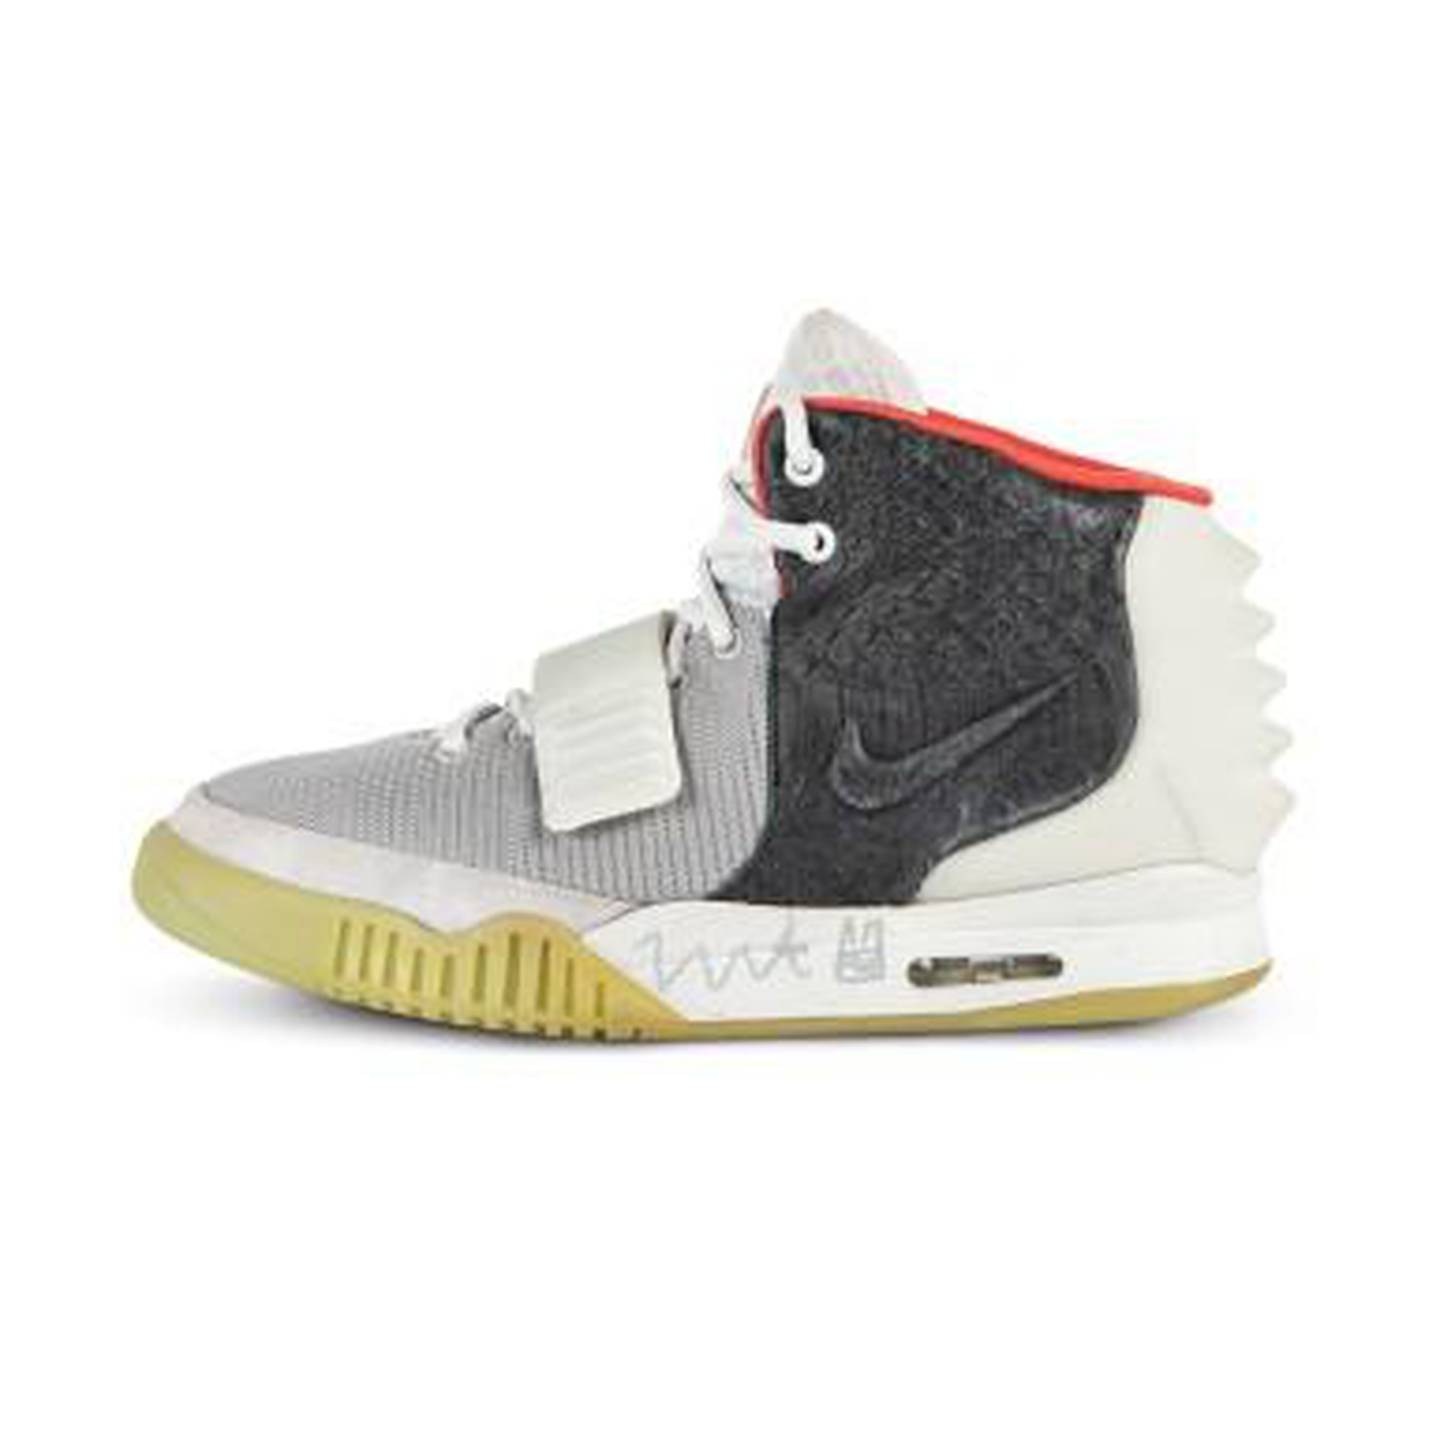 This design of the Nike Air Yeezy 2 'Mismatch' never went into production and sold for $50,400 at an auction. Sotheby's